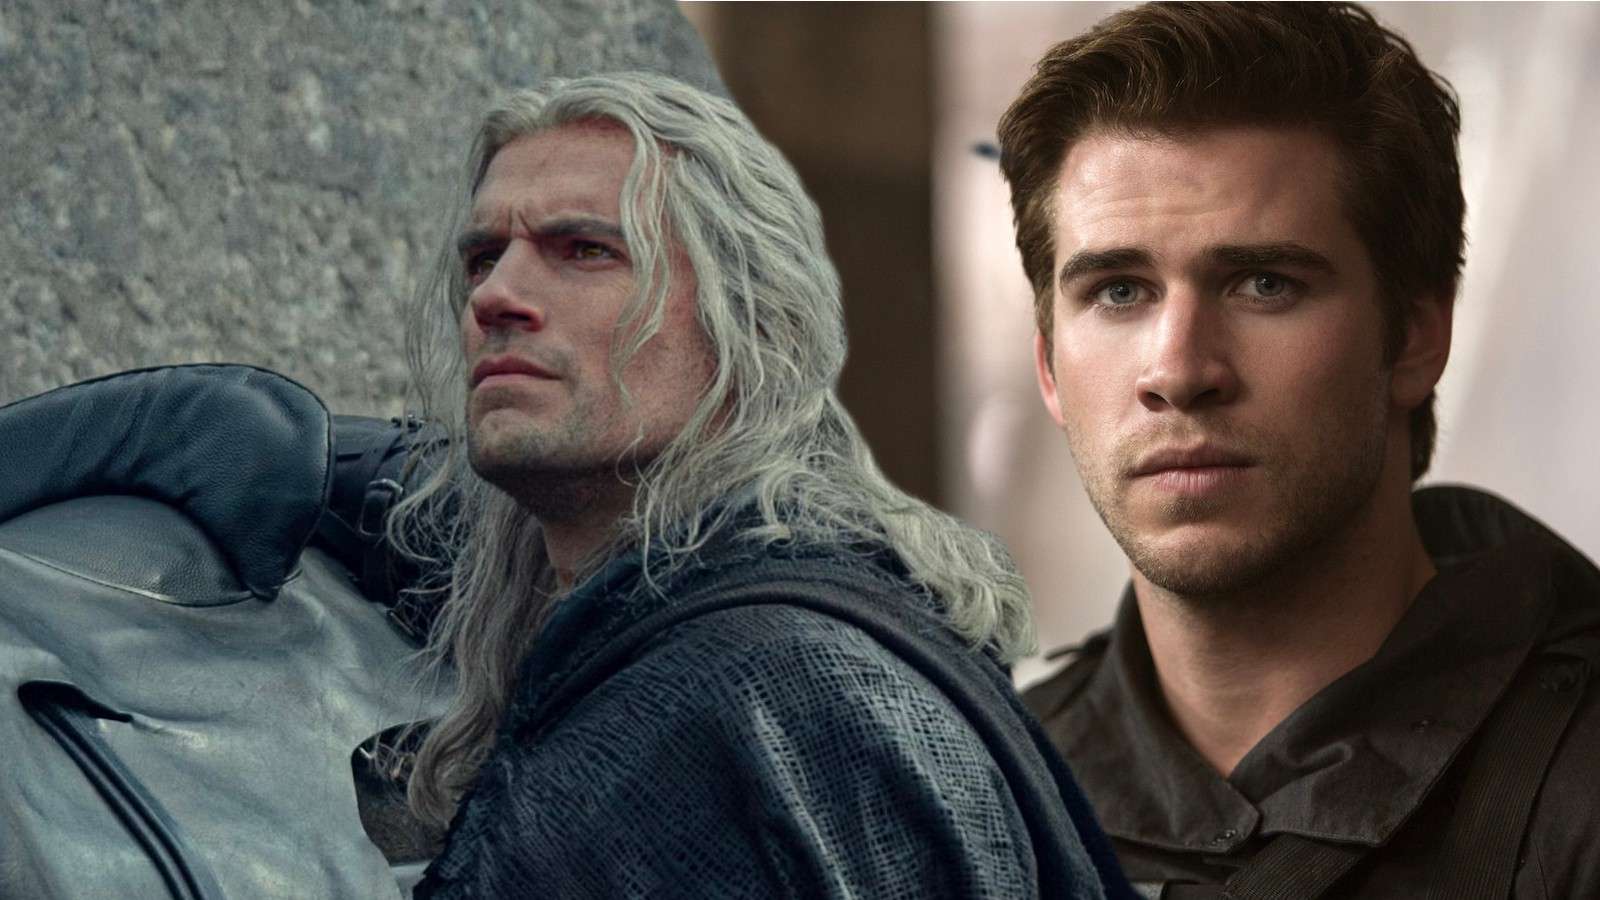 Henry Cavill as Geralt in The Witcher and Liam Hemsworth as Gale Hawthorne in The Hunger Games